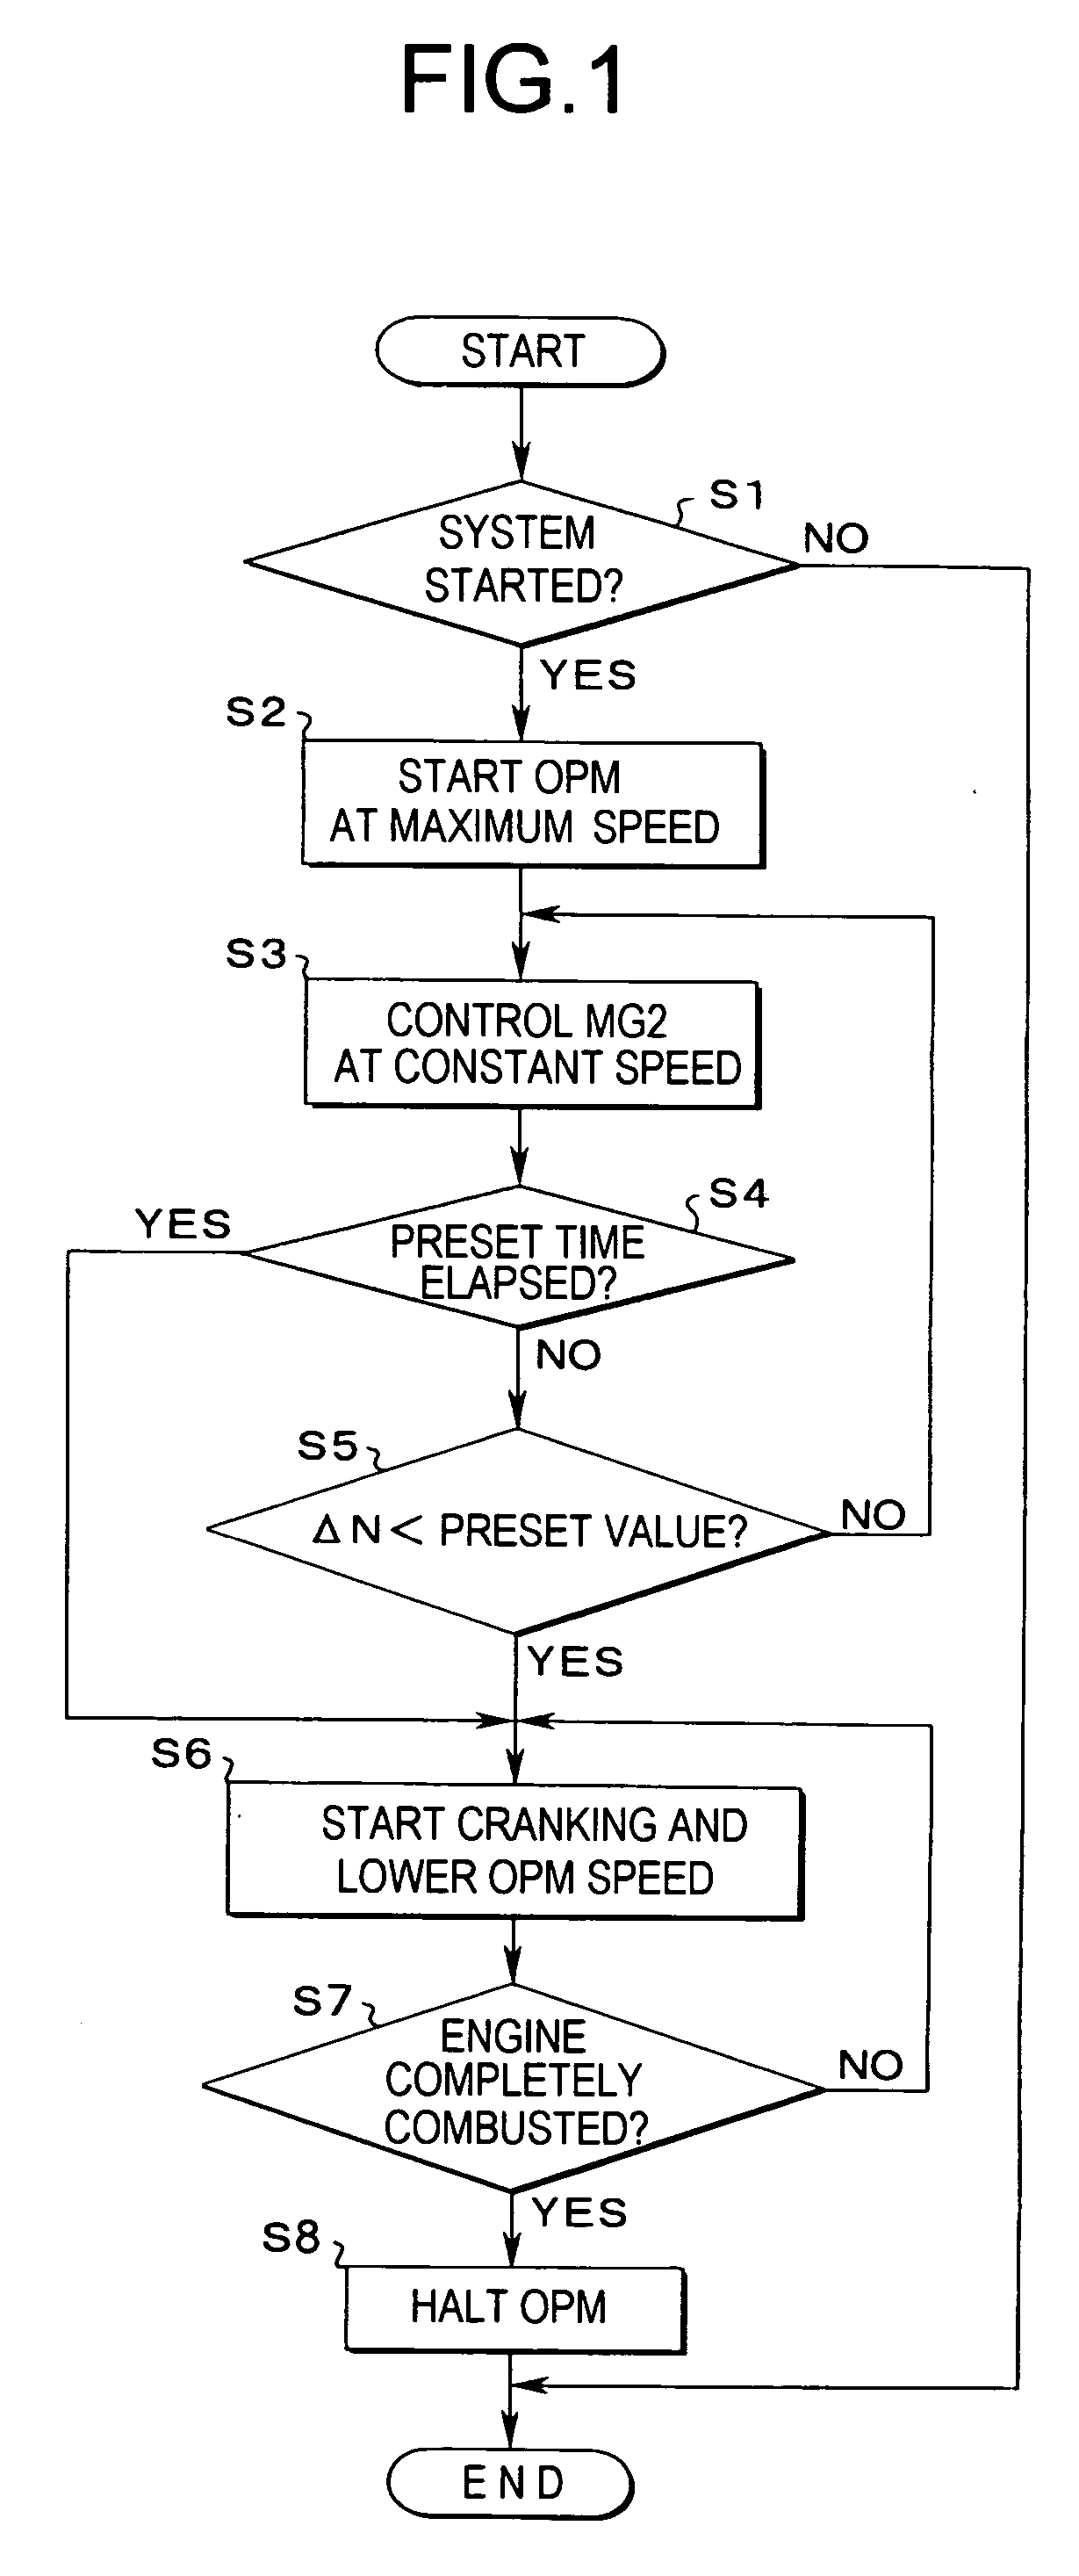 Control system for hybrid vehicles